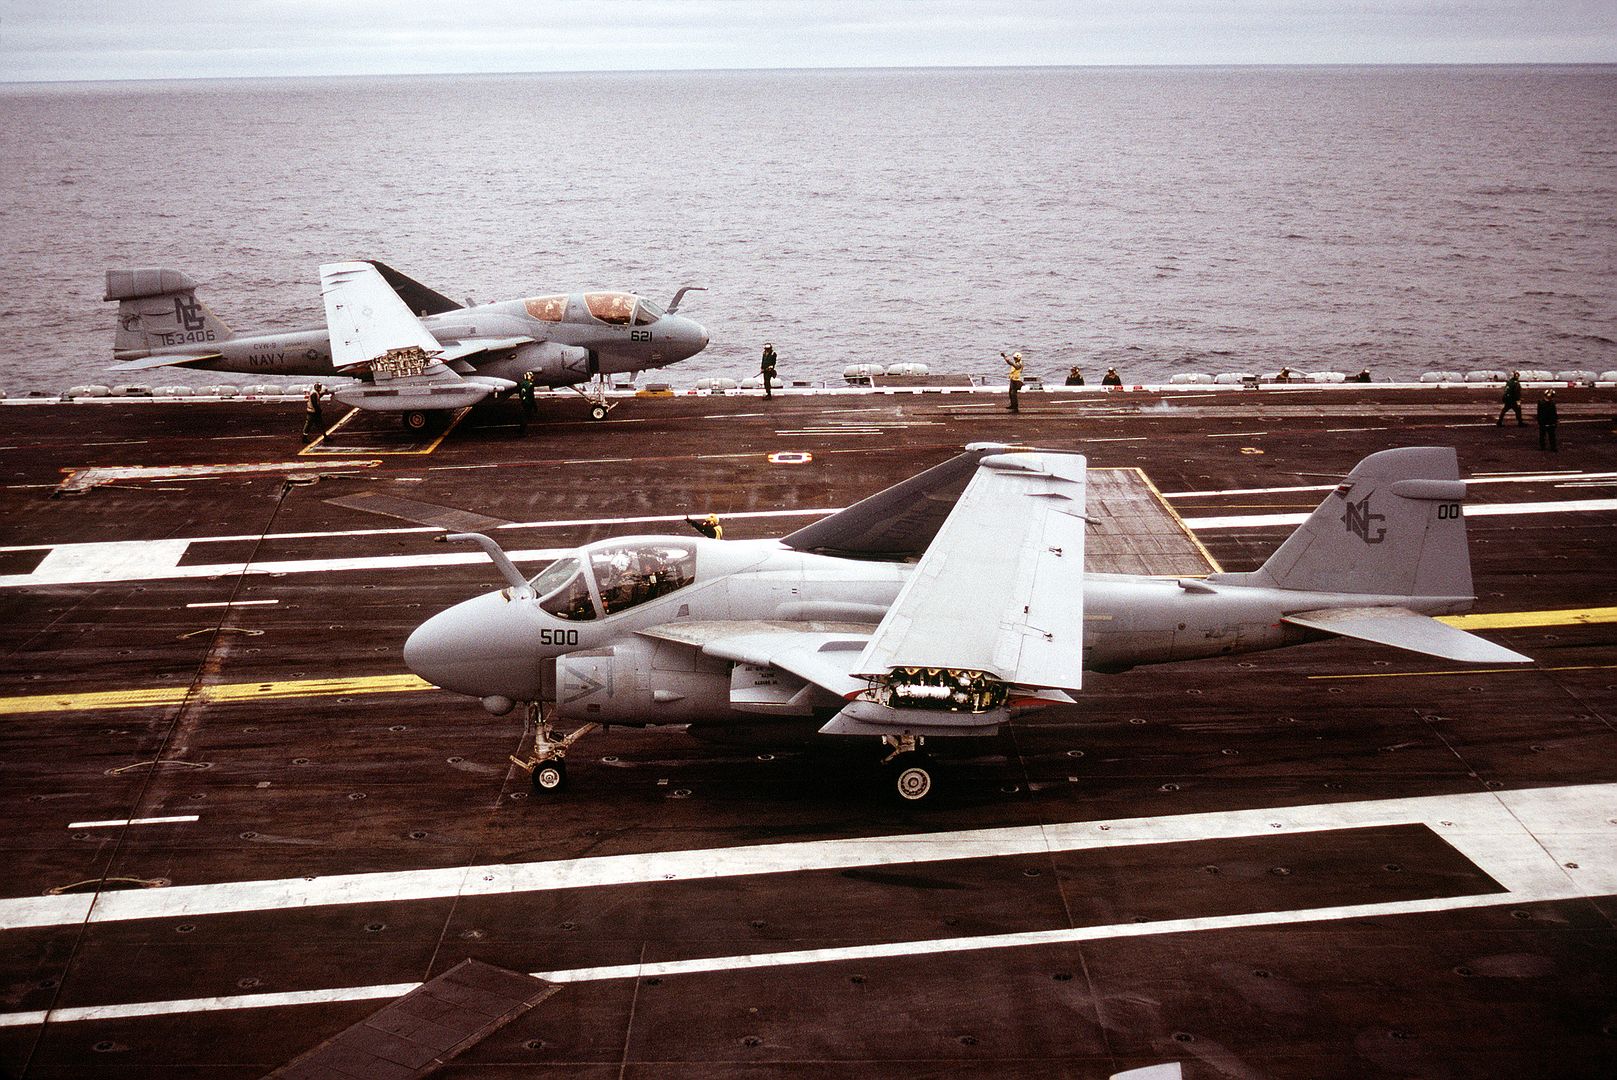 An A 6E Intruder Aircraft Of Attack Squadron 165 Taxis On The Flight Deck Foreground As An EA 6B Prowler Aircraft Background Of Tactical Electronic Warfare Squadron 138